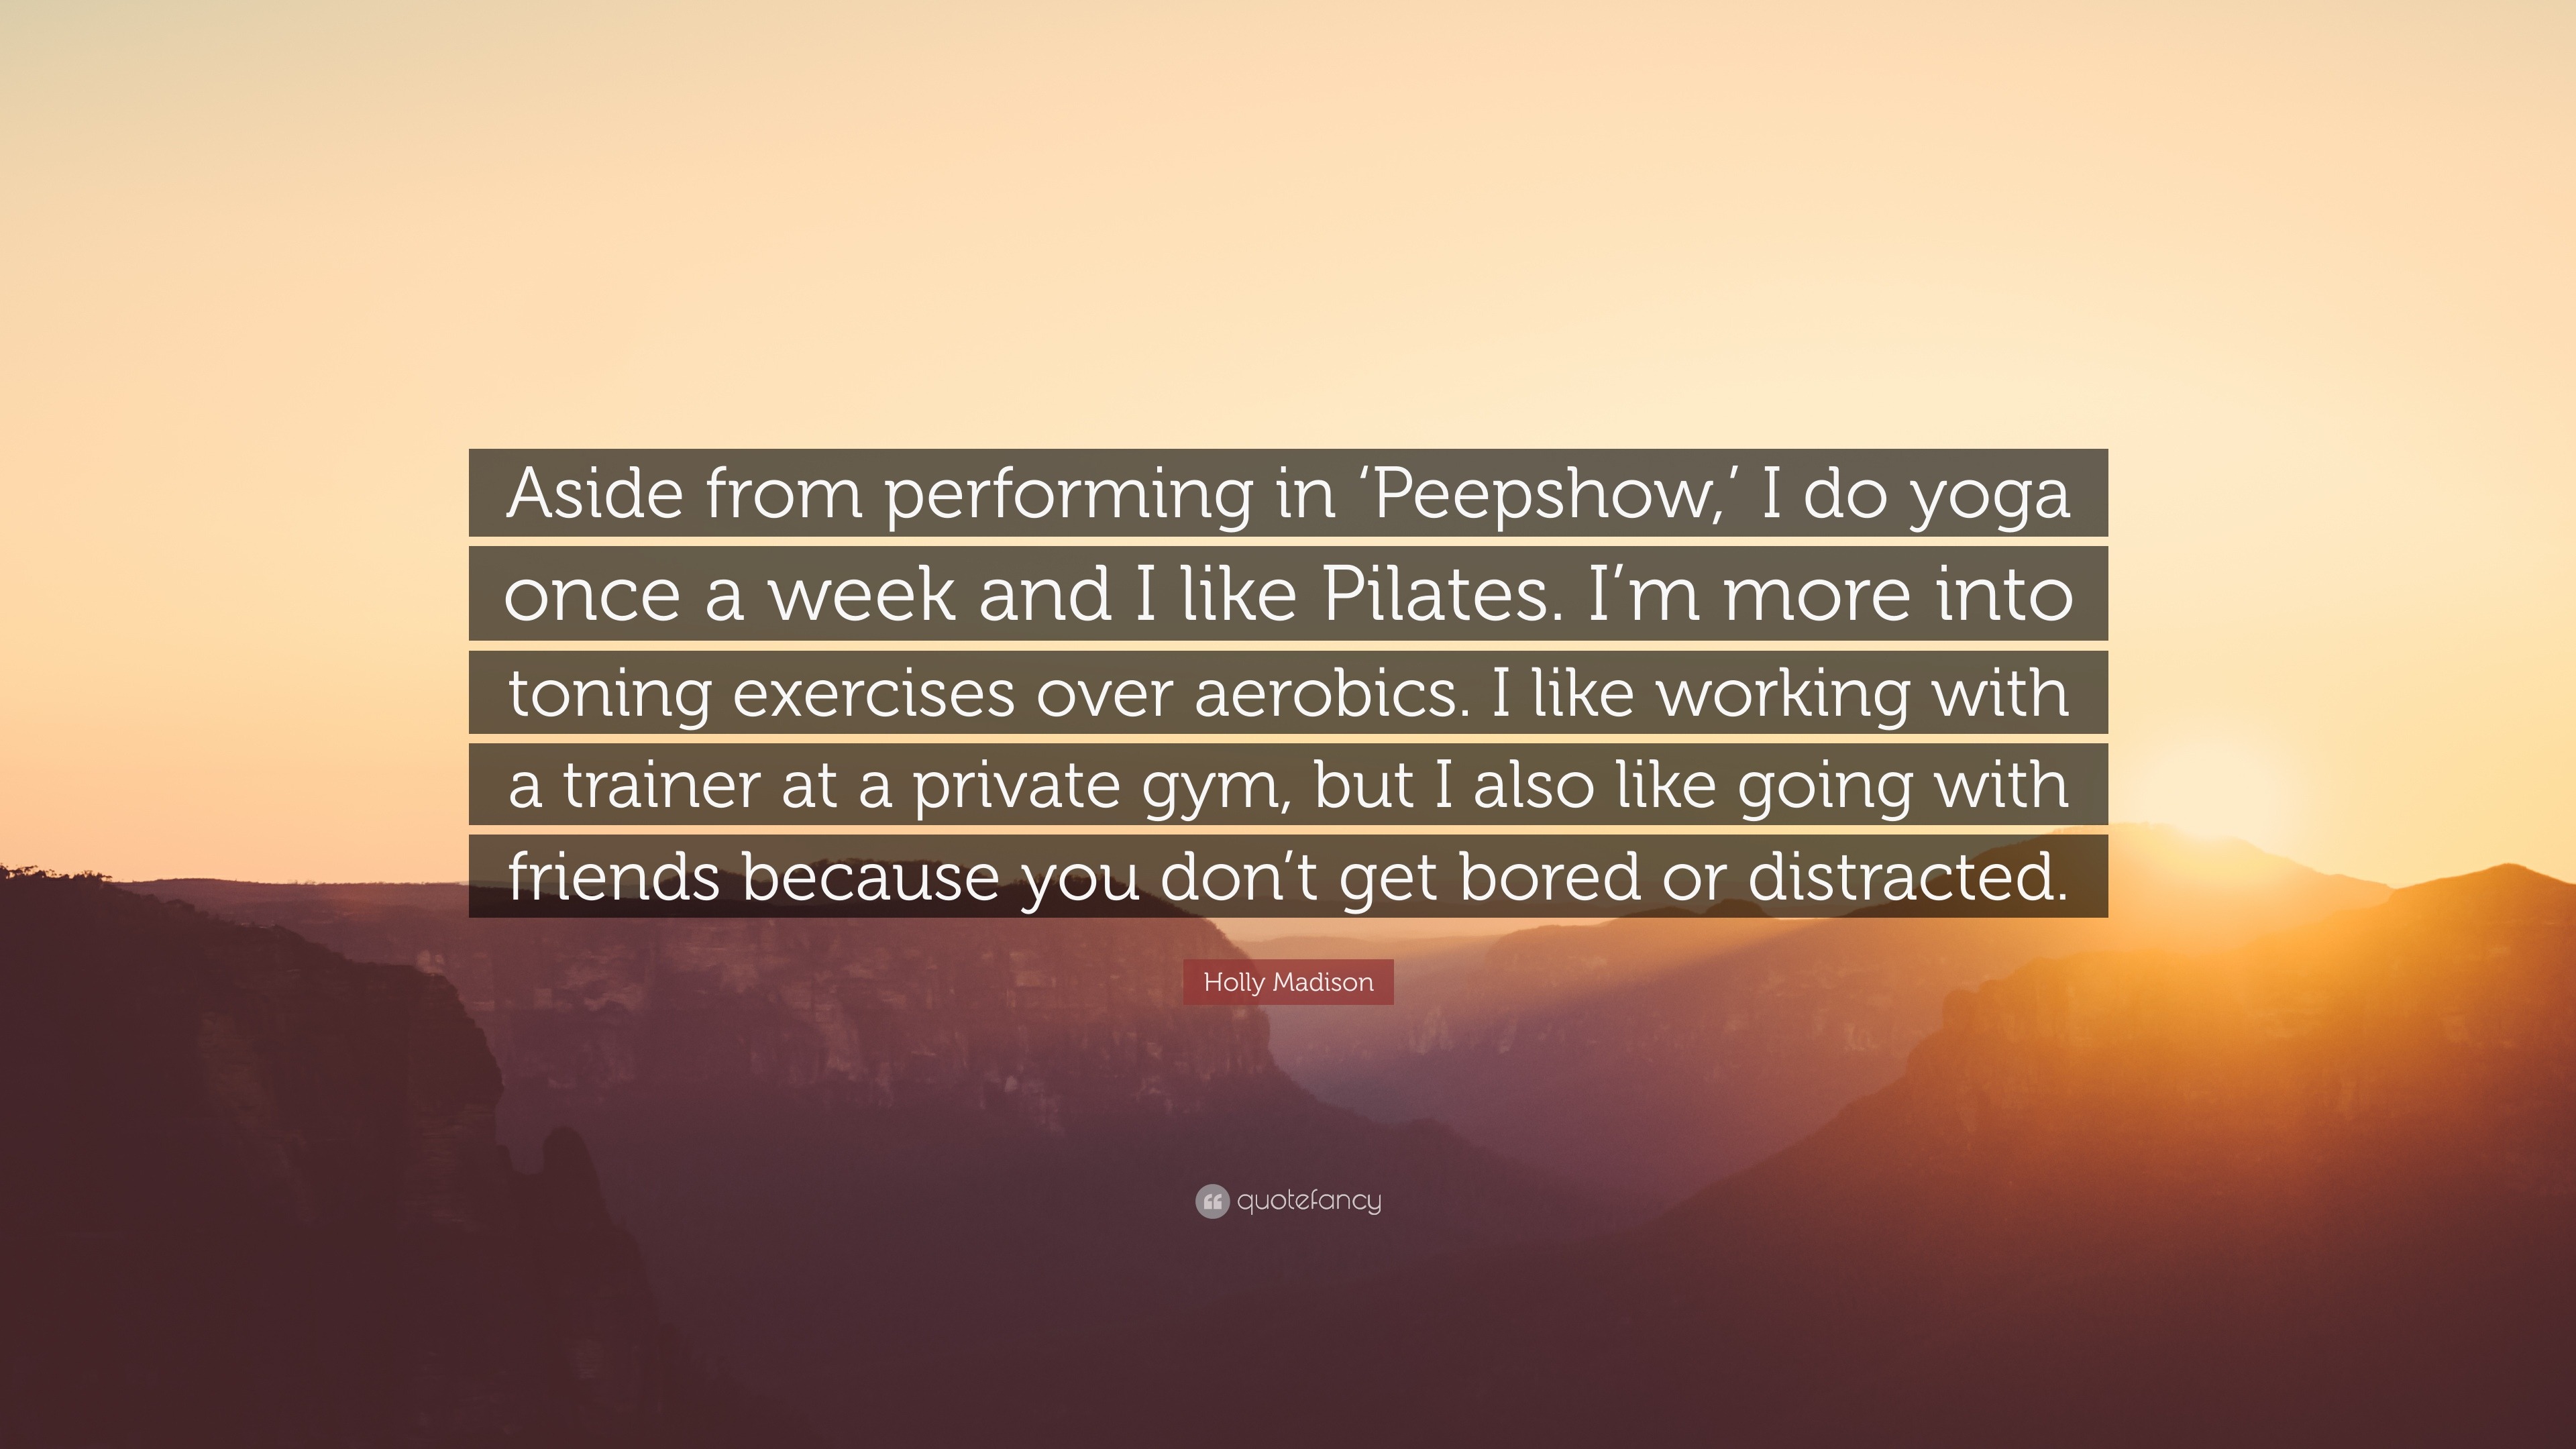 Holly Madison Quote: “Aside From Performing In 'Peepshow,' I Do Yoga Once A Week And I Like Pilates. I'm More Into Toning Exercises Over Aerob...”